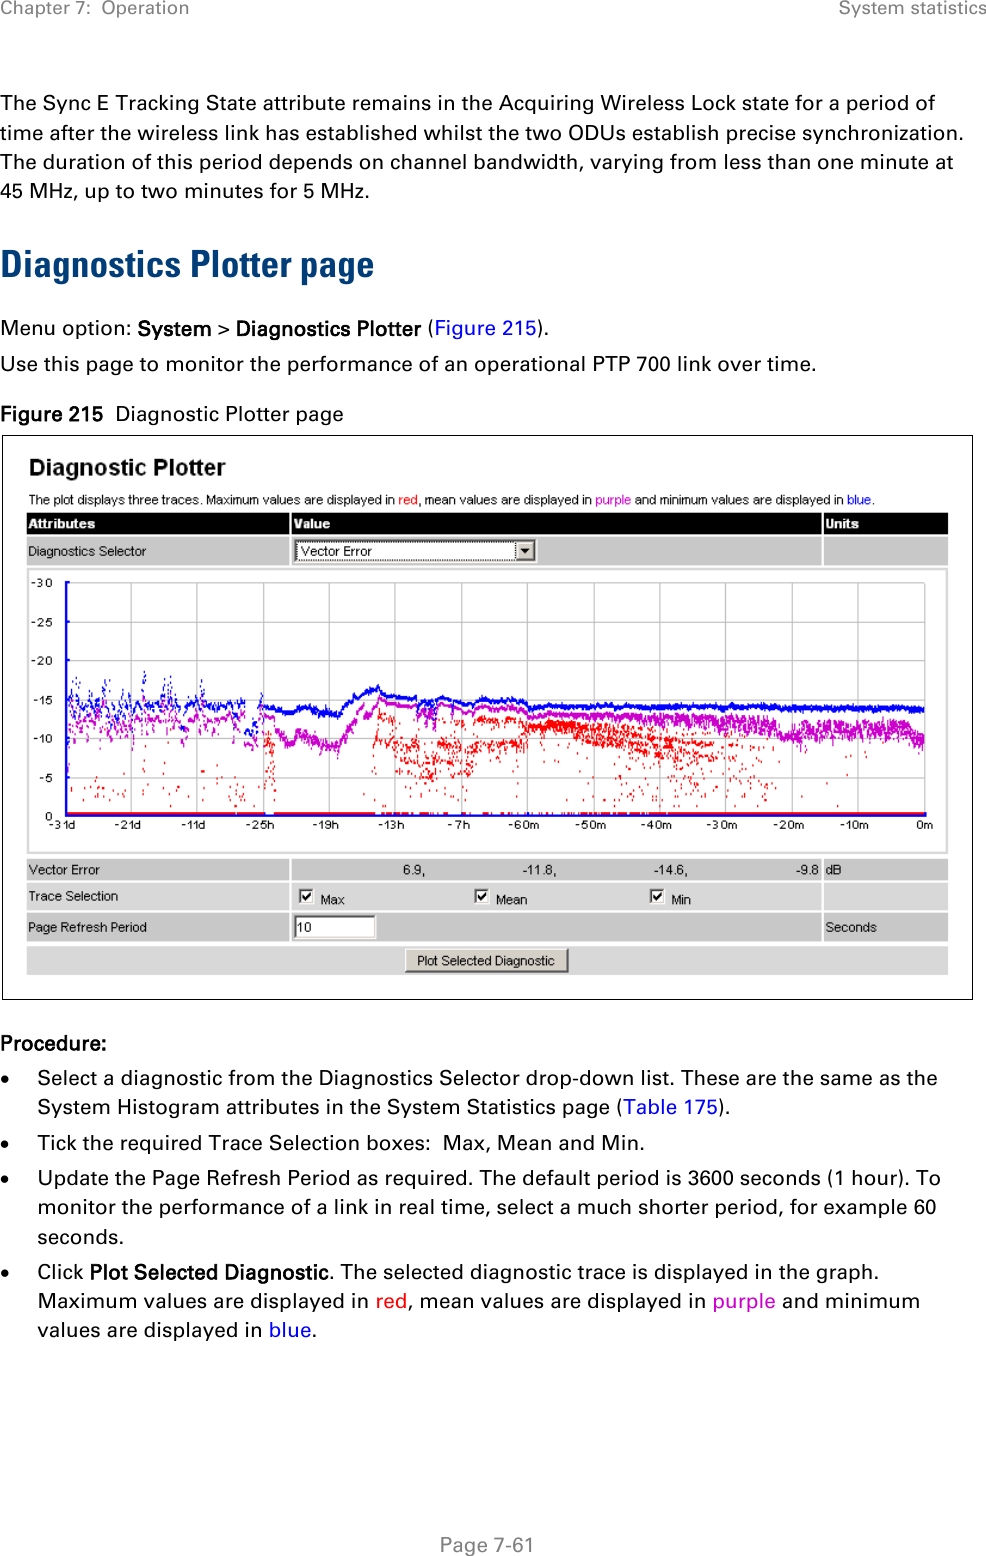 Chapter 7:  Operation System statistics  The Sync E Tracking State attribute remains in the Acquiring Wireless Lock state for a period of time after the wireless link has established whilst the two ODUs establish precise synchronization. The duration of this period depends on channel bandwidth, varying from less than one minute at 45 MHz, up to two minutes for 5 MHz.  Diagnostics Plotter page Menu option: System &gt; Diagnostics Plotter (Figure 215). Use this page to monitor the performance of an operational PTP 700 link over time. Figure 215  Diagnostic Plotter page  Procedure: • Select a diagnostic from the Diagnostics Selector drop-down list. These are the same as the System Histogram attributes in the System Statistics page (Table 175). • Tick the required Trace Selection boxes:  Max, Mean and Min. • Update the Page Refresh Period as required. The default period is 3600 seconds (1 hour). To monitor the performance of a link in real time, select a much shorter period, for example 60 seconds. • Click Plot Selected Diagnostic. The selected diagnostic trace is displayed in the graph. Maximum values are displayed in red, mean values are displayed in purple and minimum values are displayed in blue.   Page 7-61 